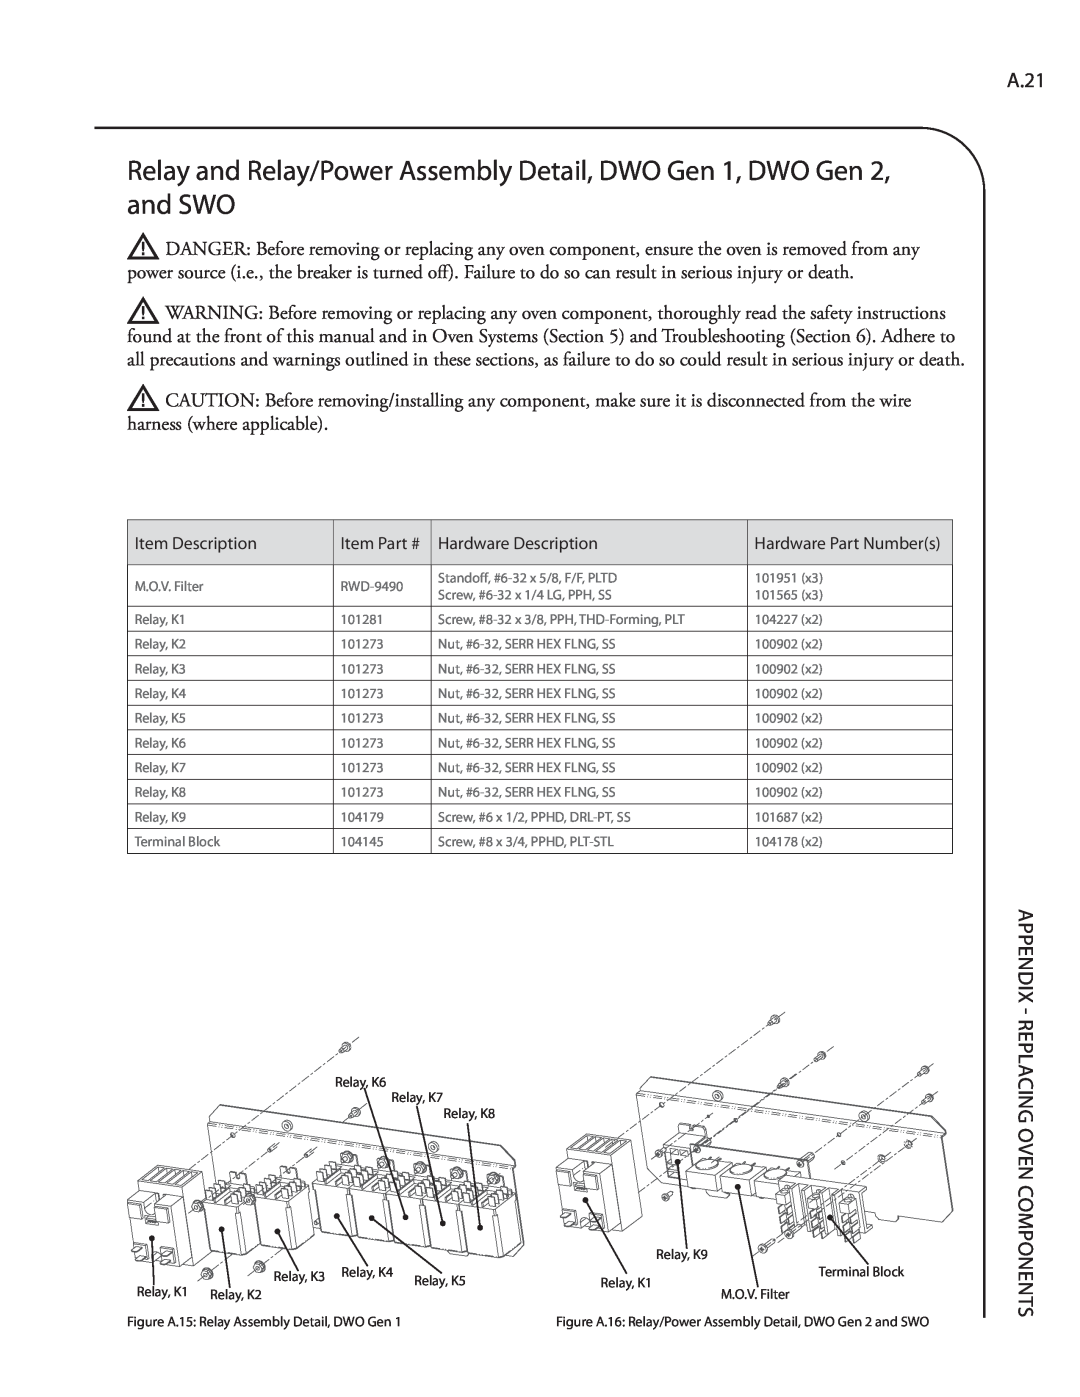 Turbo Chef Technologies Residential Single and Double Wall Oven service manual A.21 APPENDIX - REPLACING OVEN COMPONENTS 